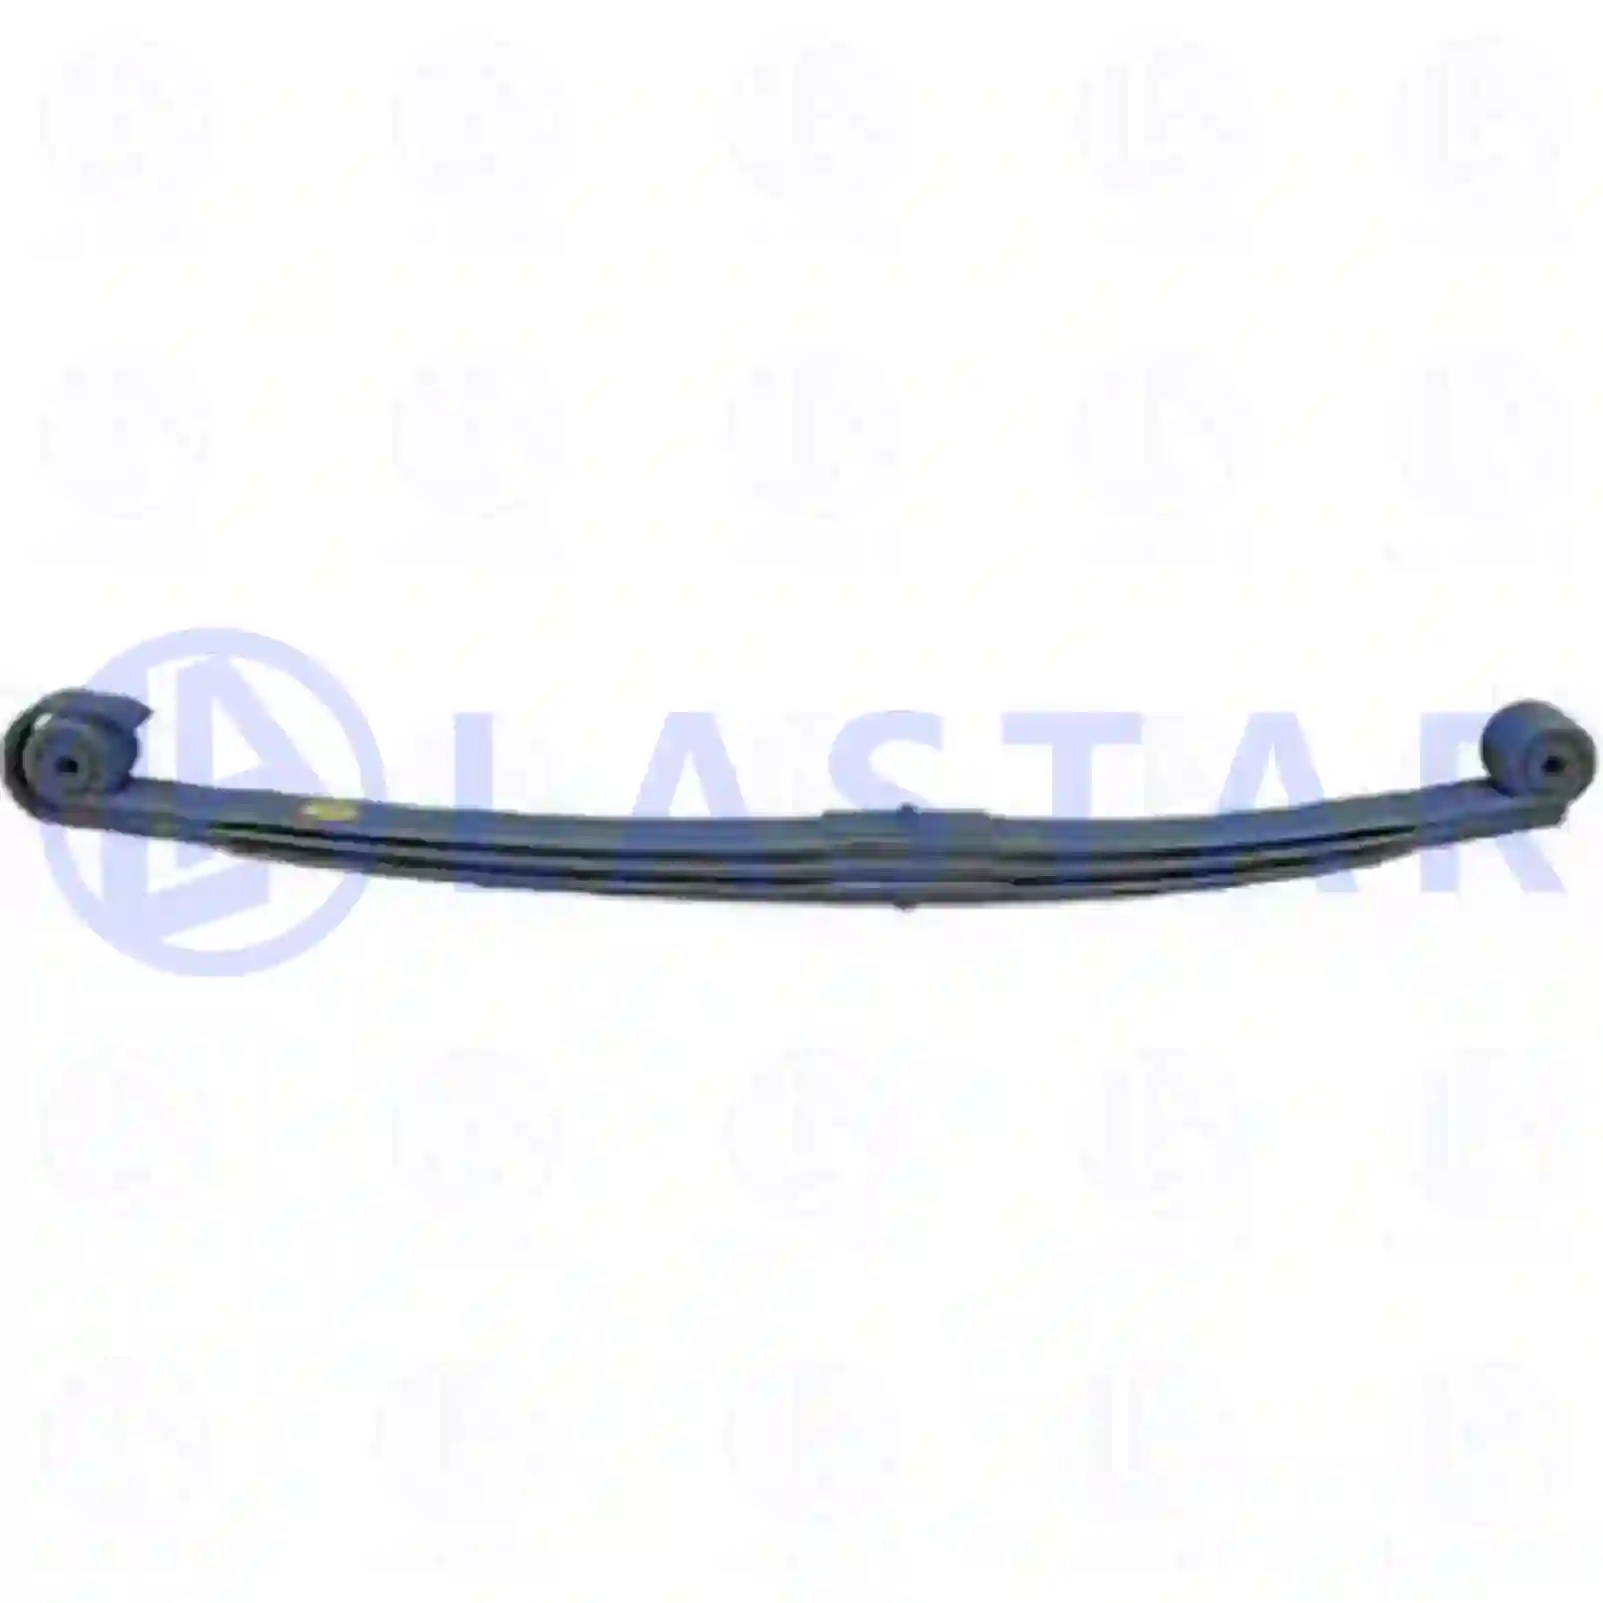 Leaf spring, front, 77728094, 9493200202 ||  77728094 Lastar Spare Part | Truck Spare Parts, Auotomotive Spare Parts Leaf spring, front, 77728094, 9493200202 ||  77728094 Lastar Spare Part | Truck Spare Parts, Auotomotive Spare Parts